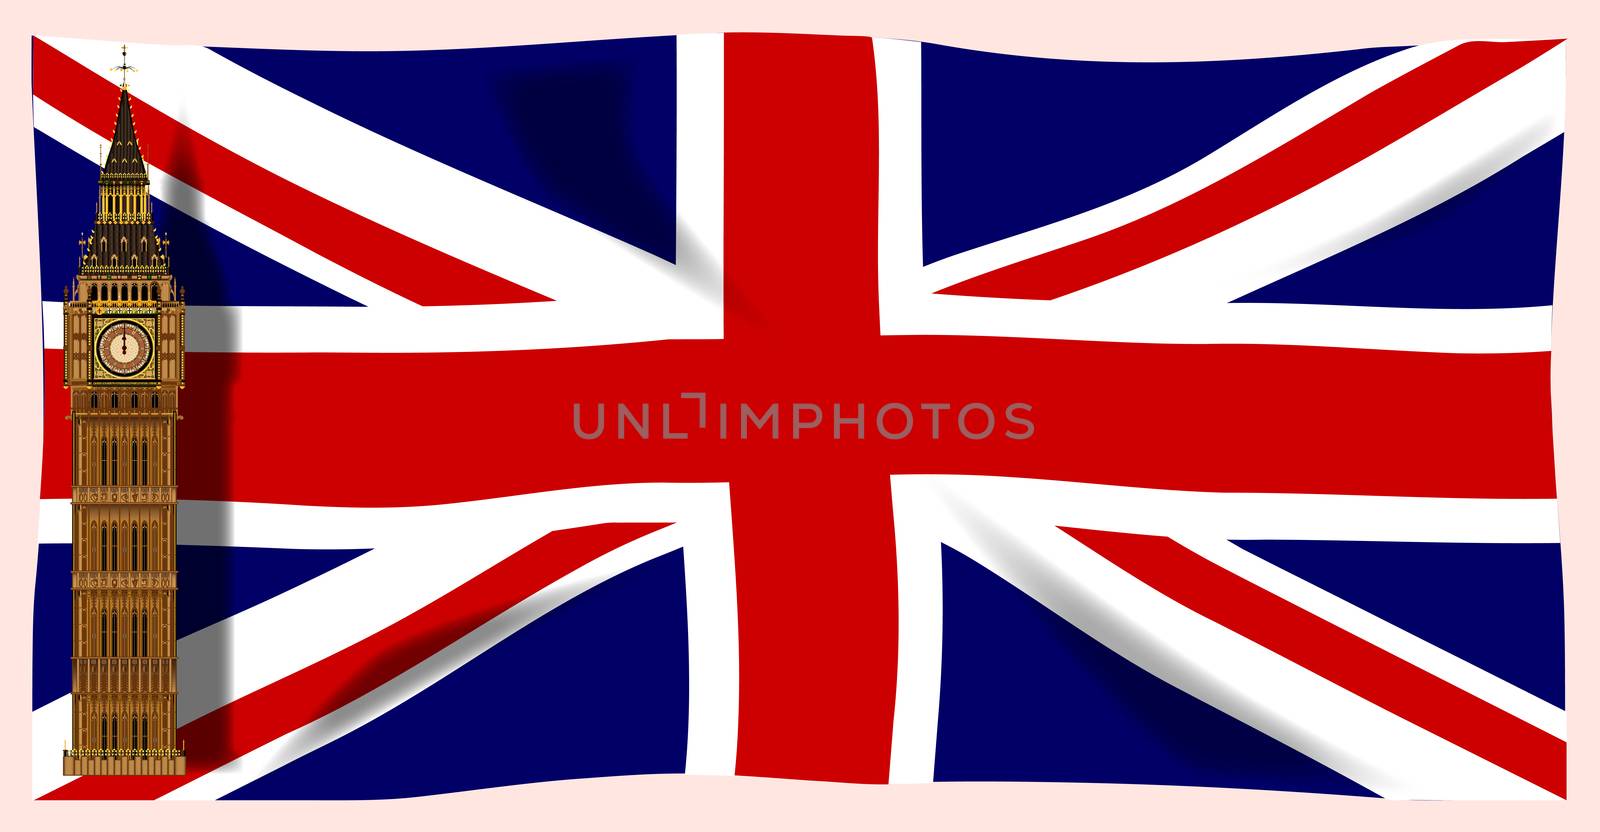 The British Union Flag, or Union JAck when used on board ship, with Big Ben plus shadows.